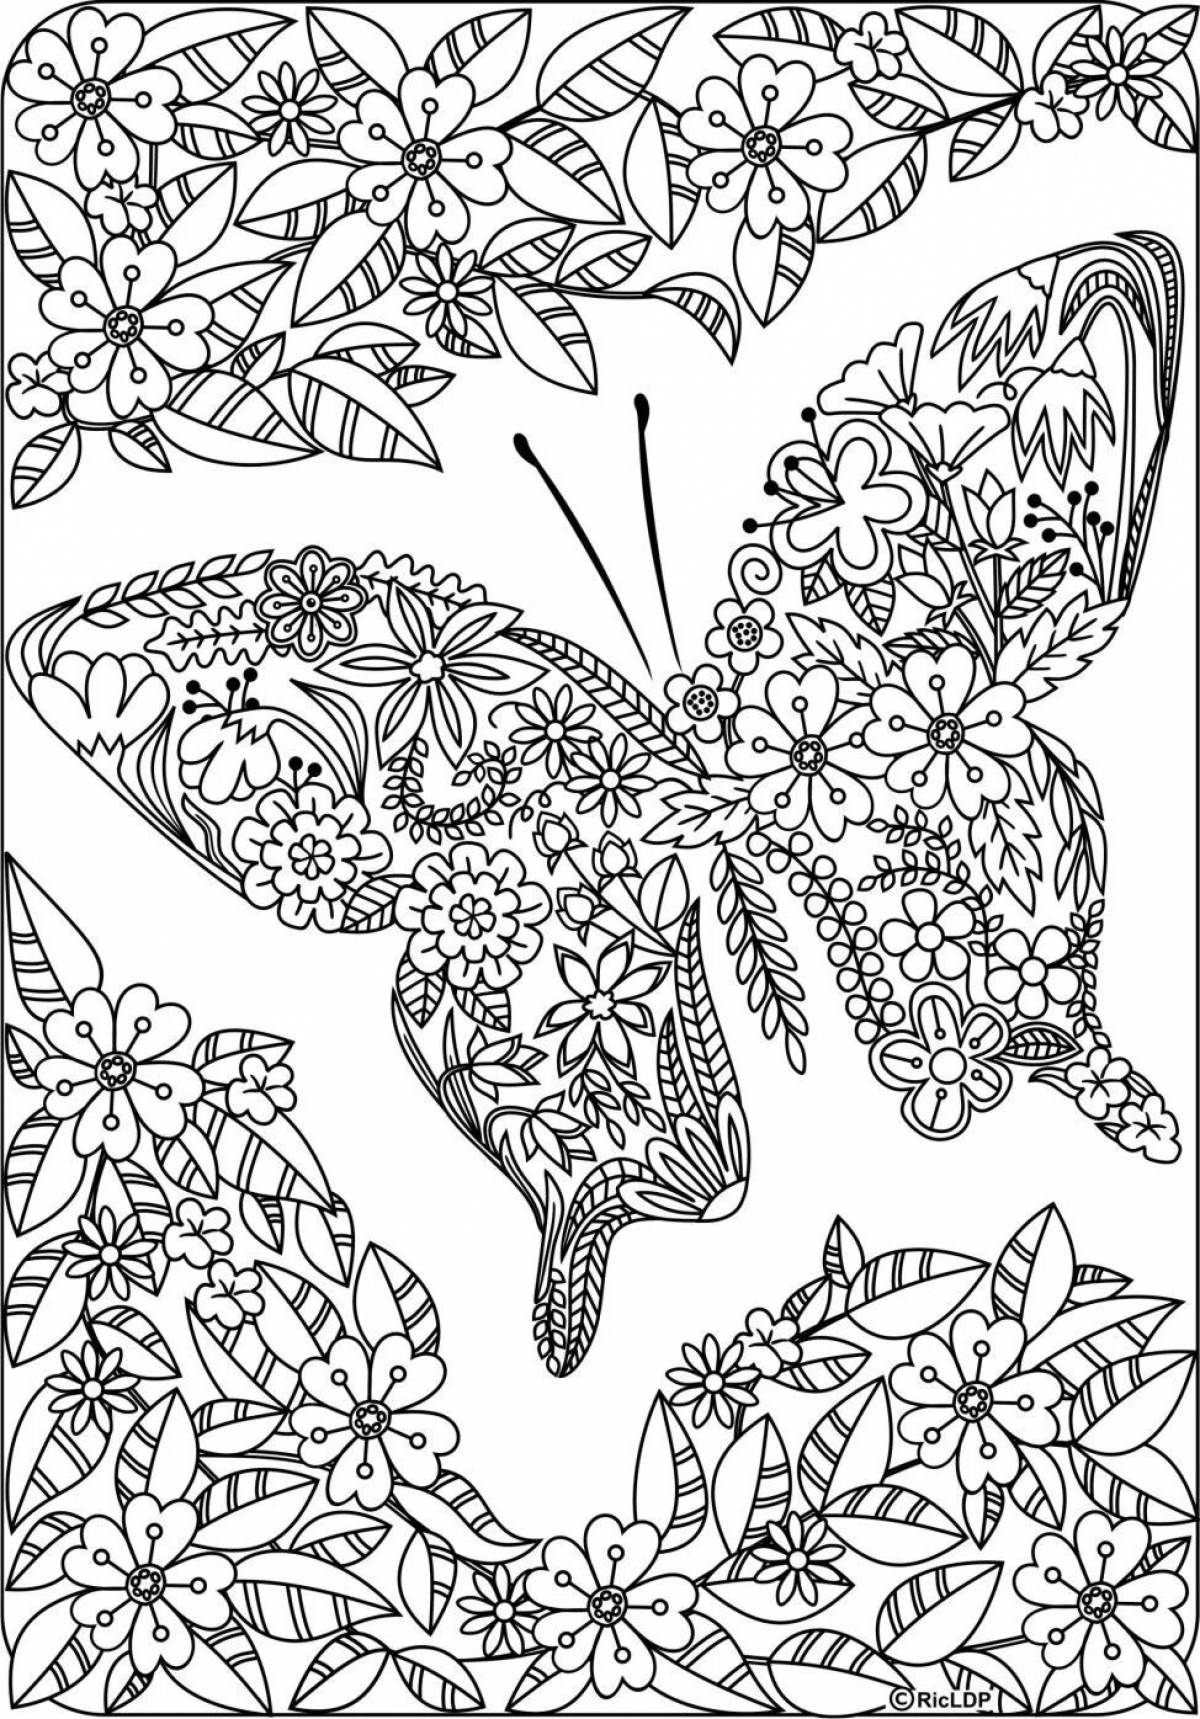 Majestic adult coloring book